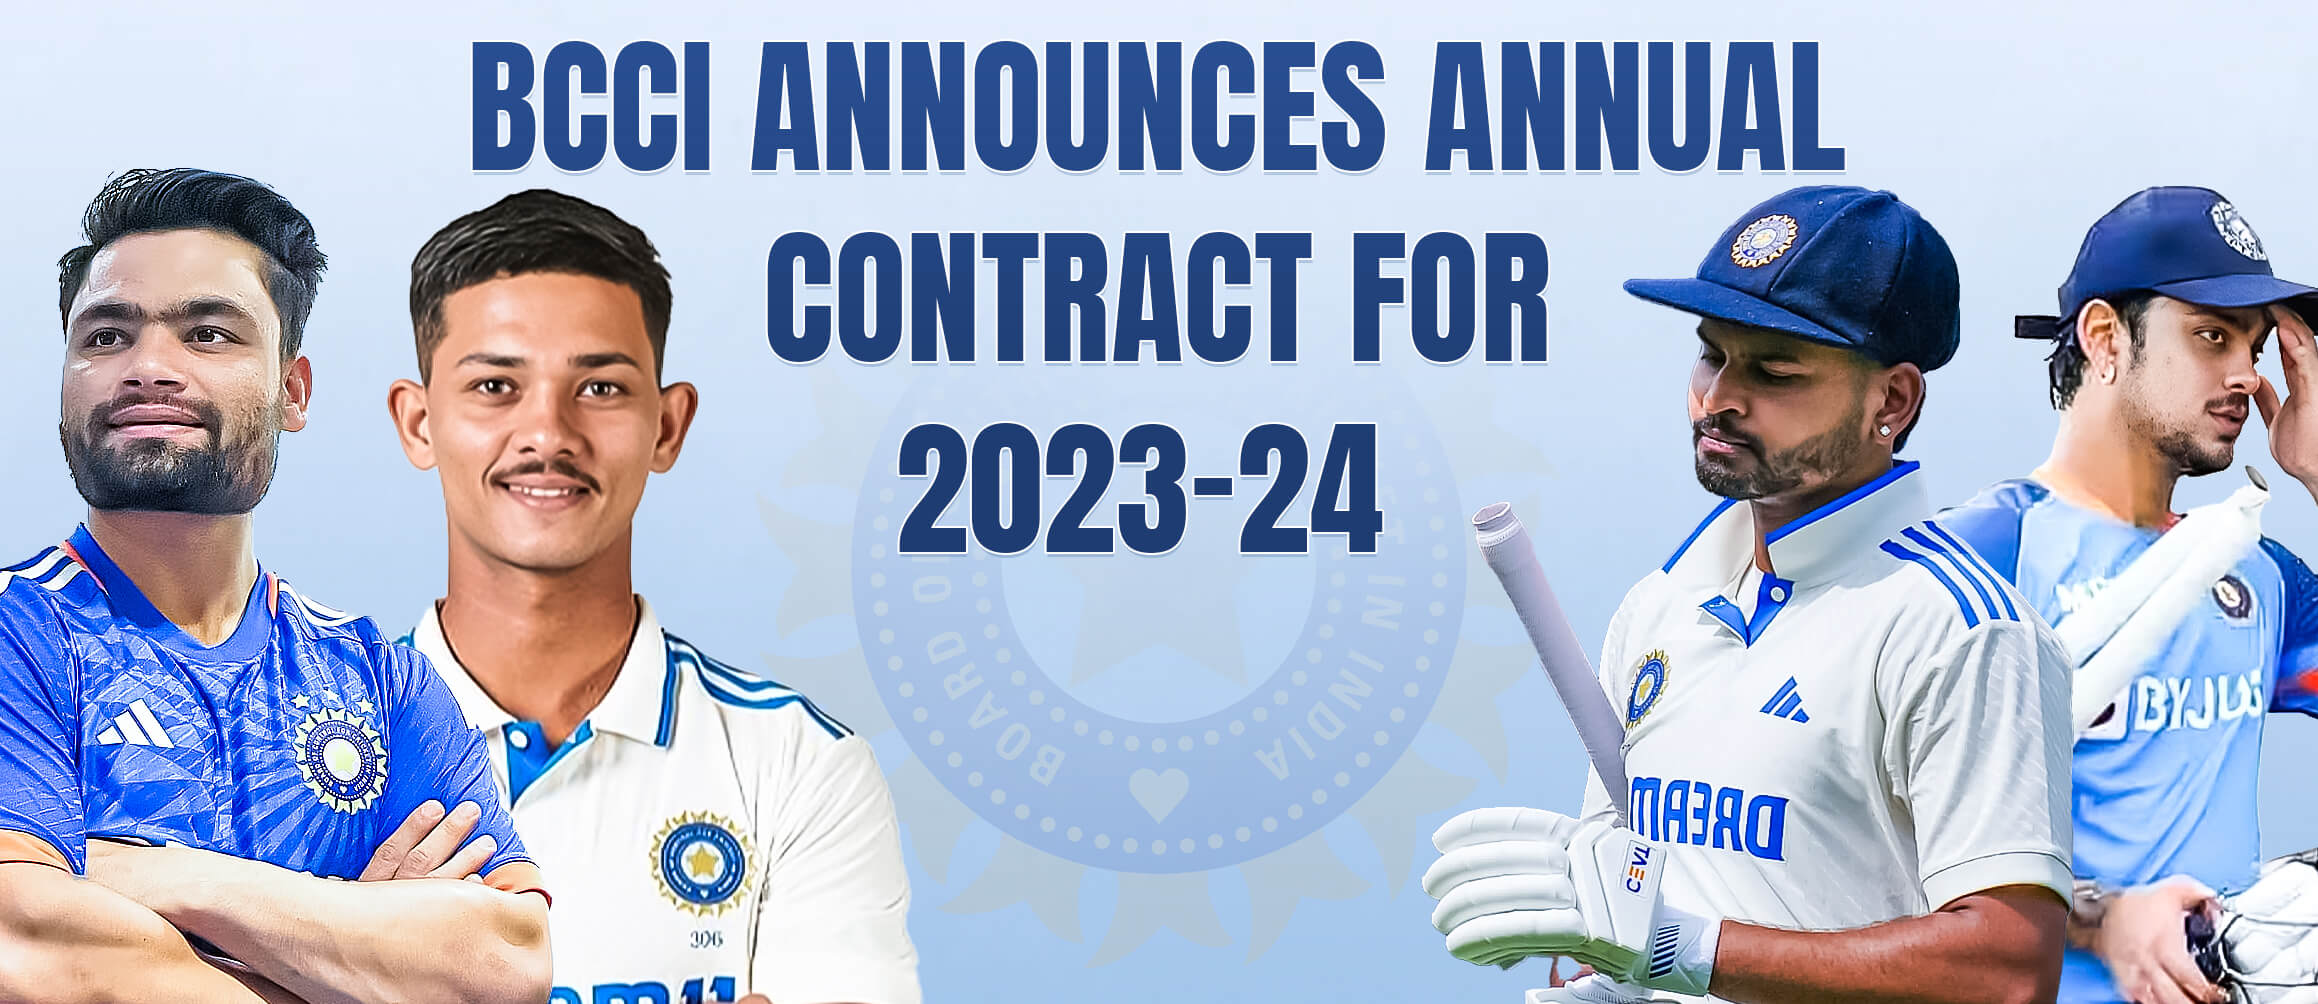 BCCI announces Annual Contract for 2023-24